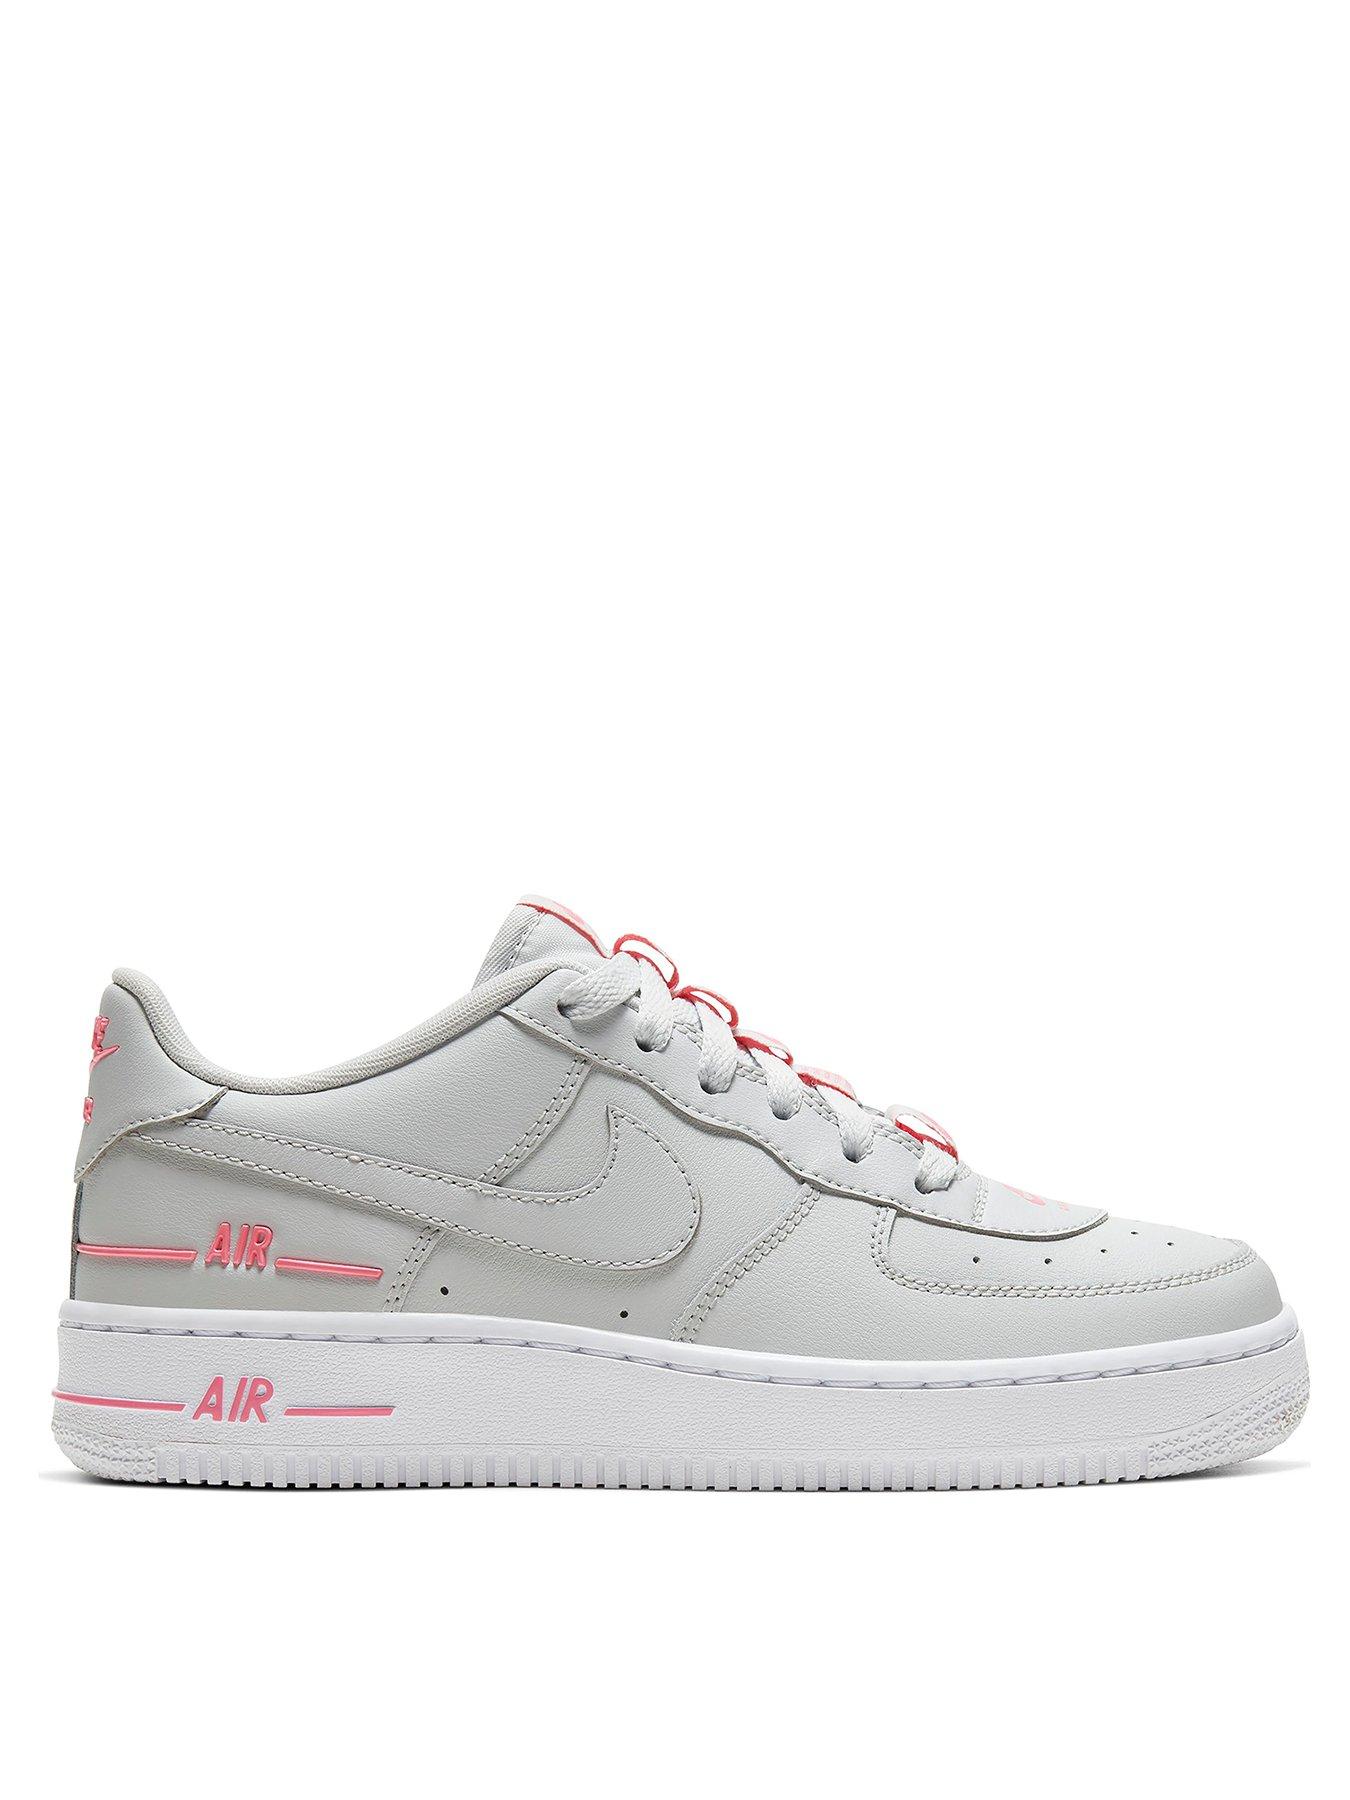 white air force 1 junior size 3